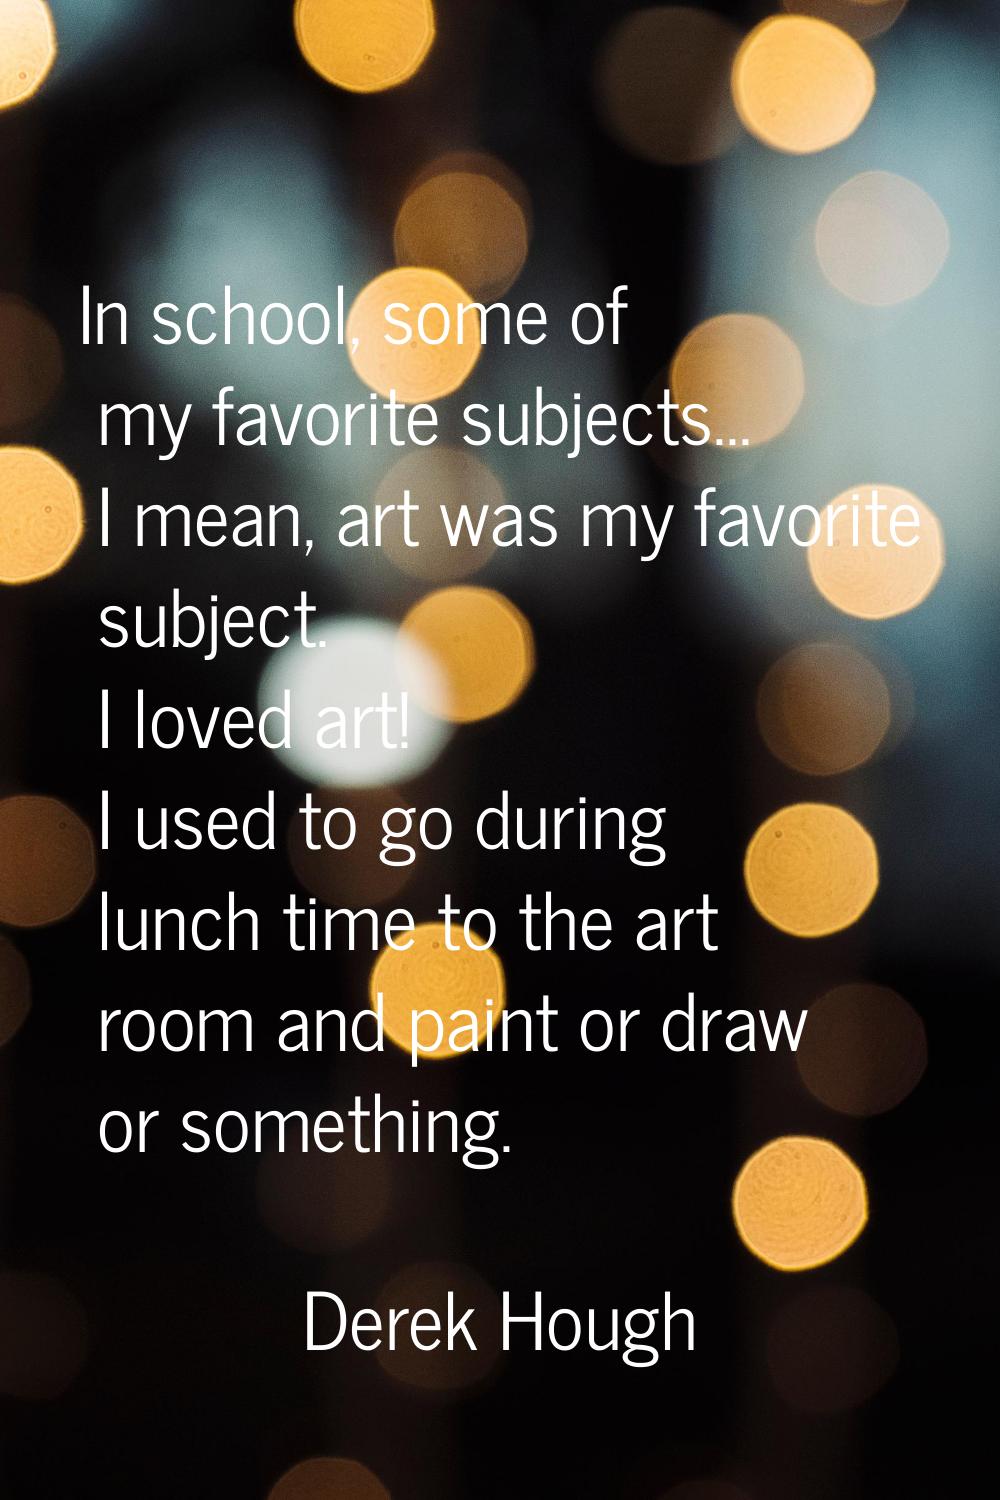 In school, some of my favorite subjects... I mean, art was my favorite subject. I loved art! I used